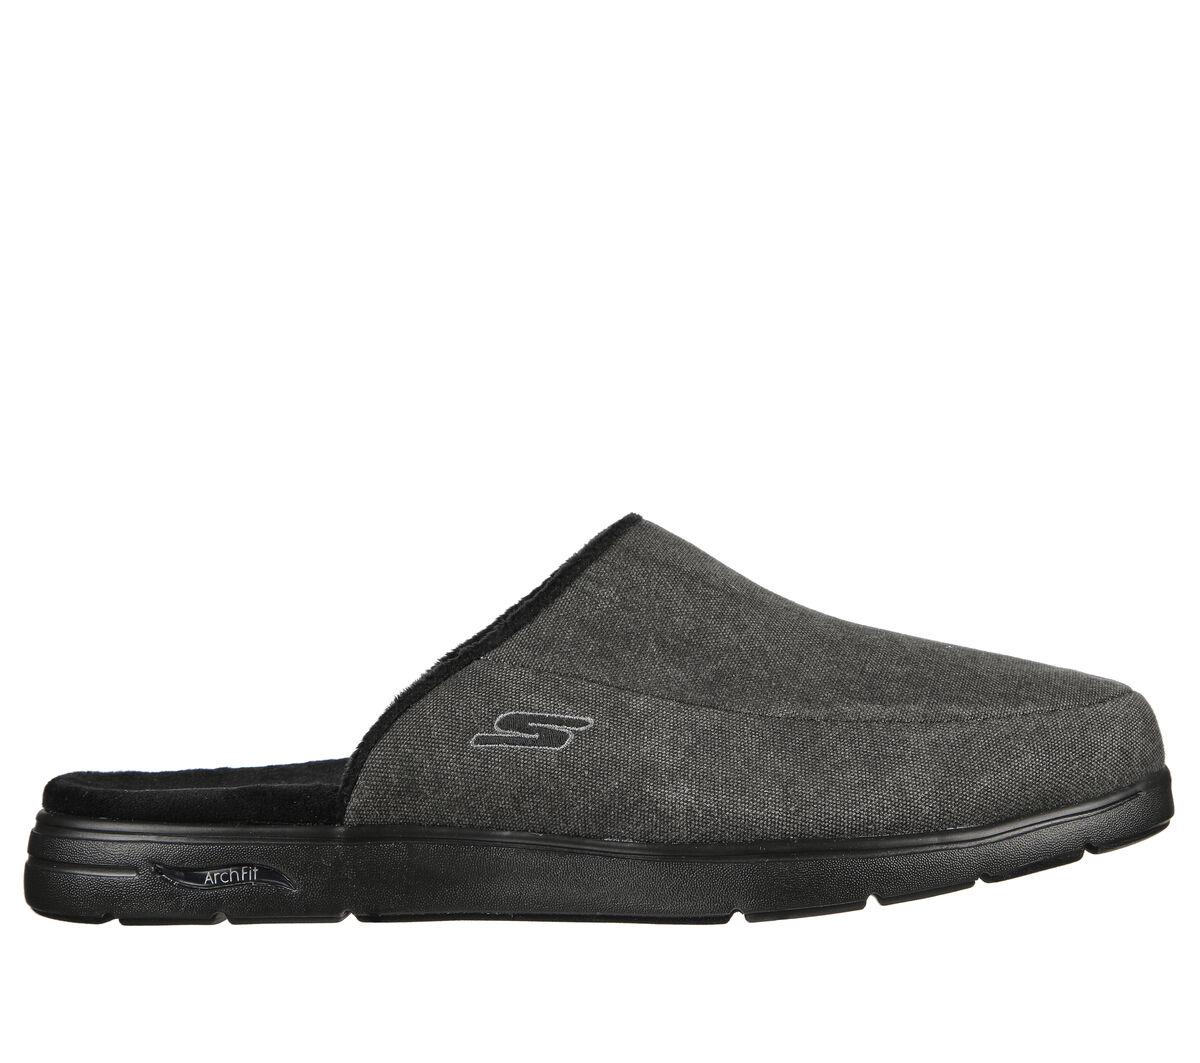 Skechers Arch Fit Lounge |